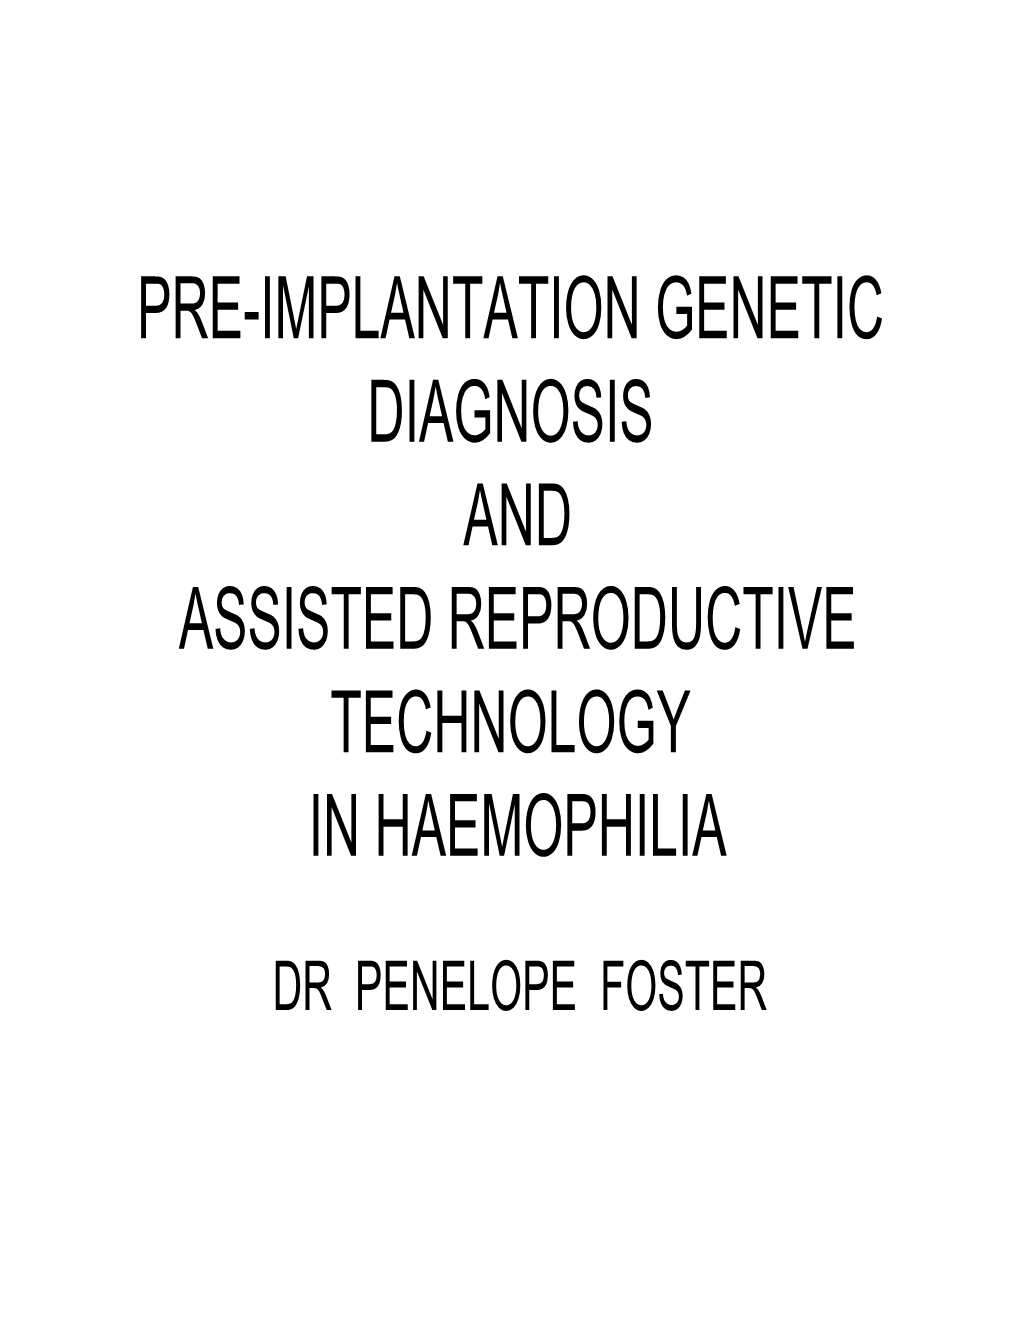 Pre-Implantation Genetic Diagnosis and Assisted Reproductive Technology in Haemophilia